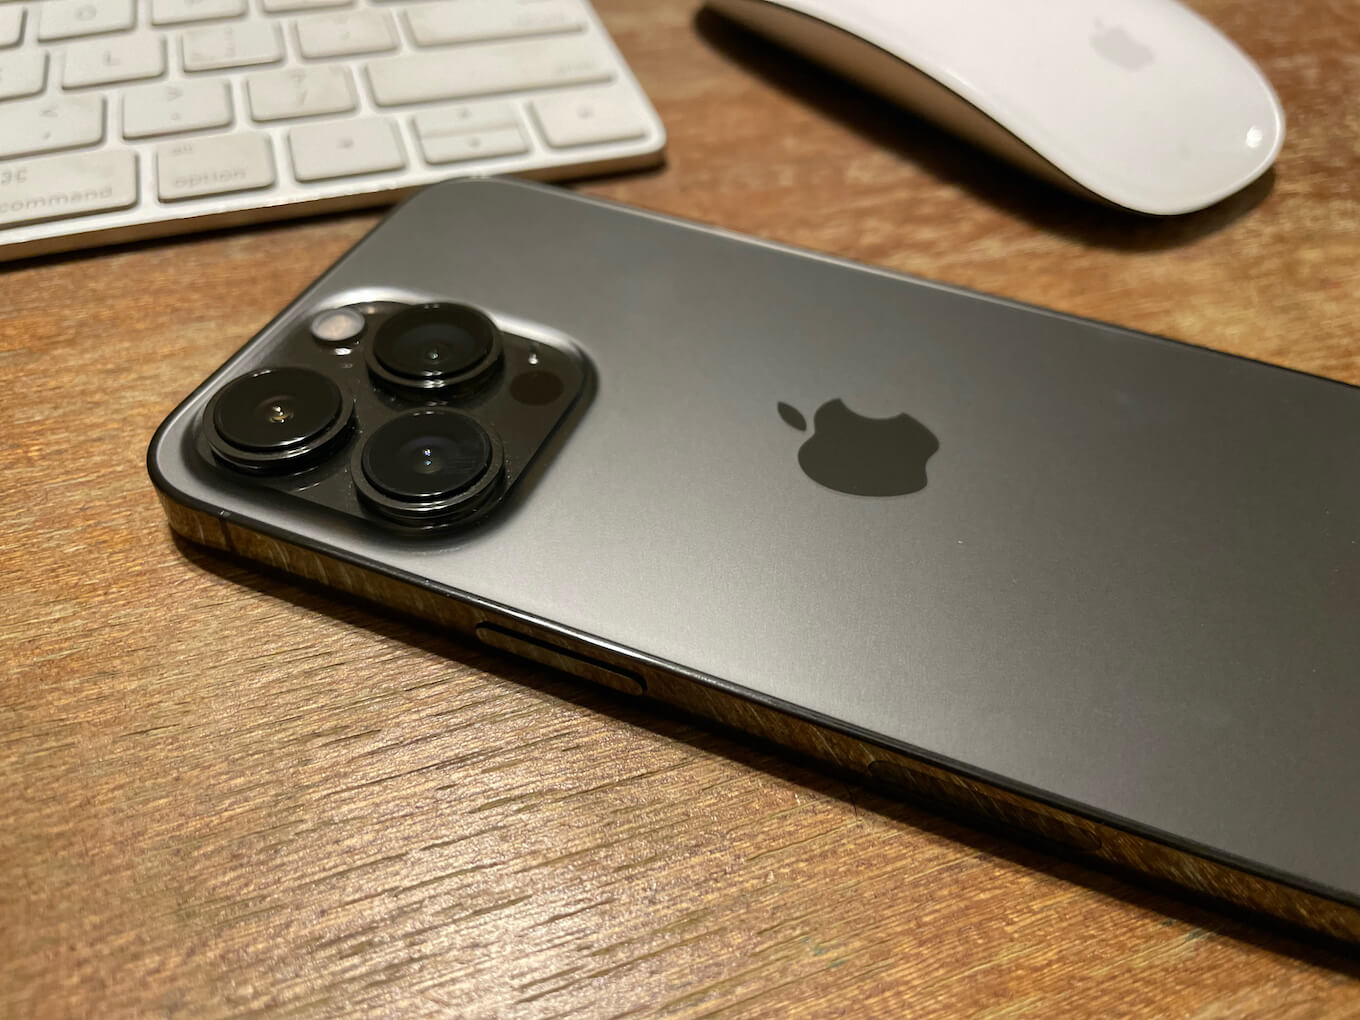 Graphite iPhone 13 Pro on a table next to a keyboard and a mouse